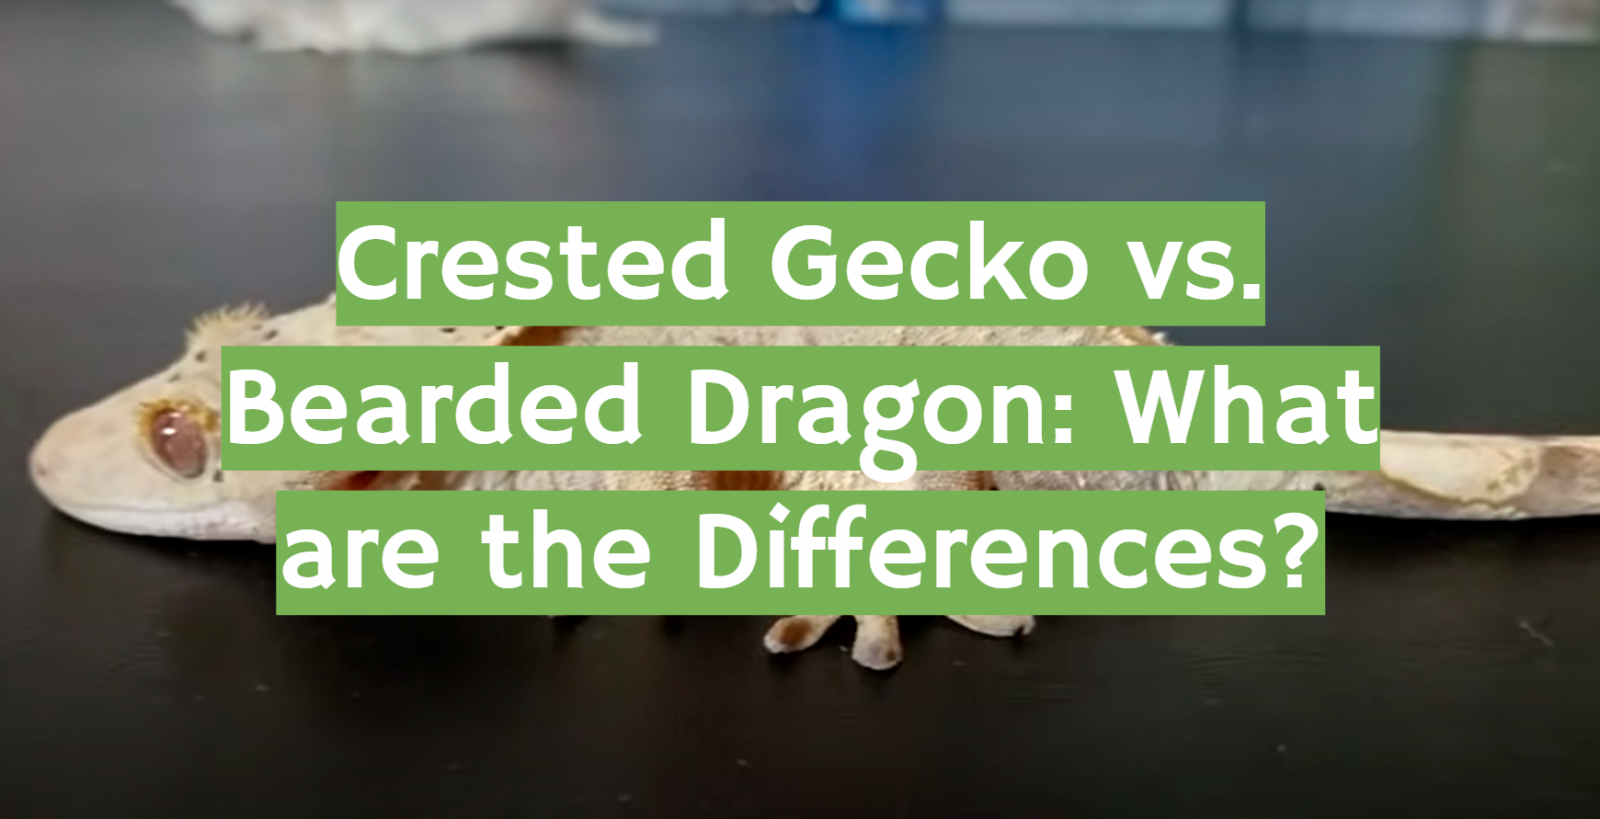 Crested Gecko vs. Bearded Dragon: What are the Differences?